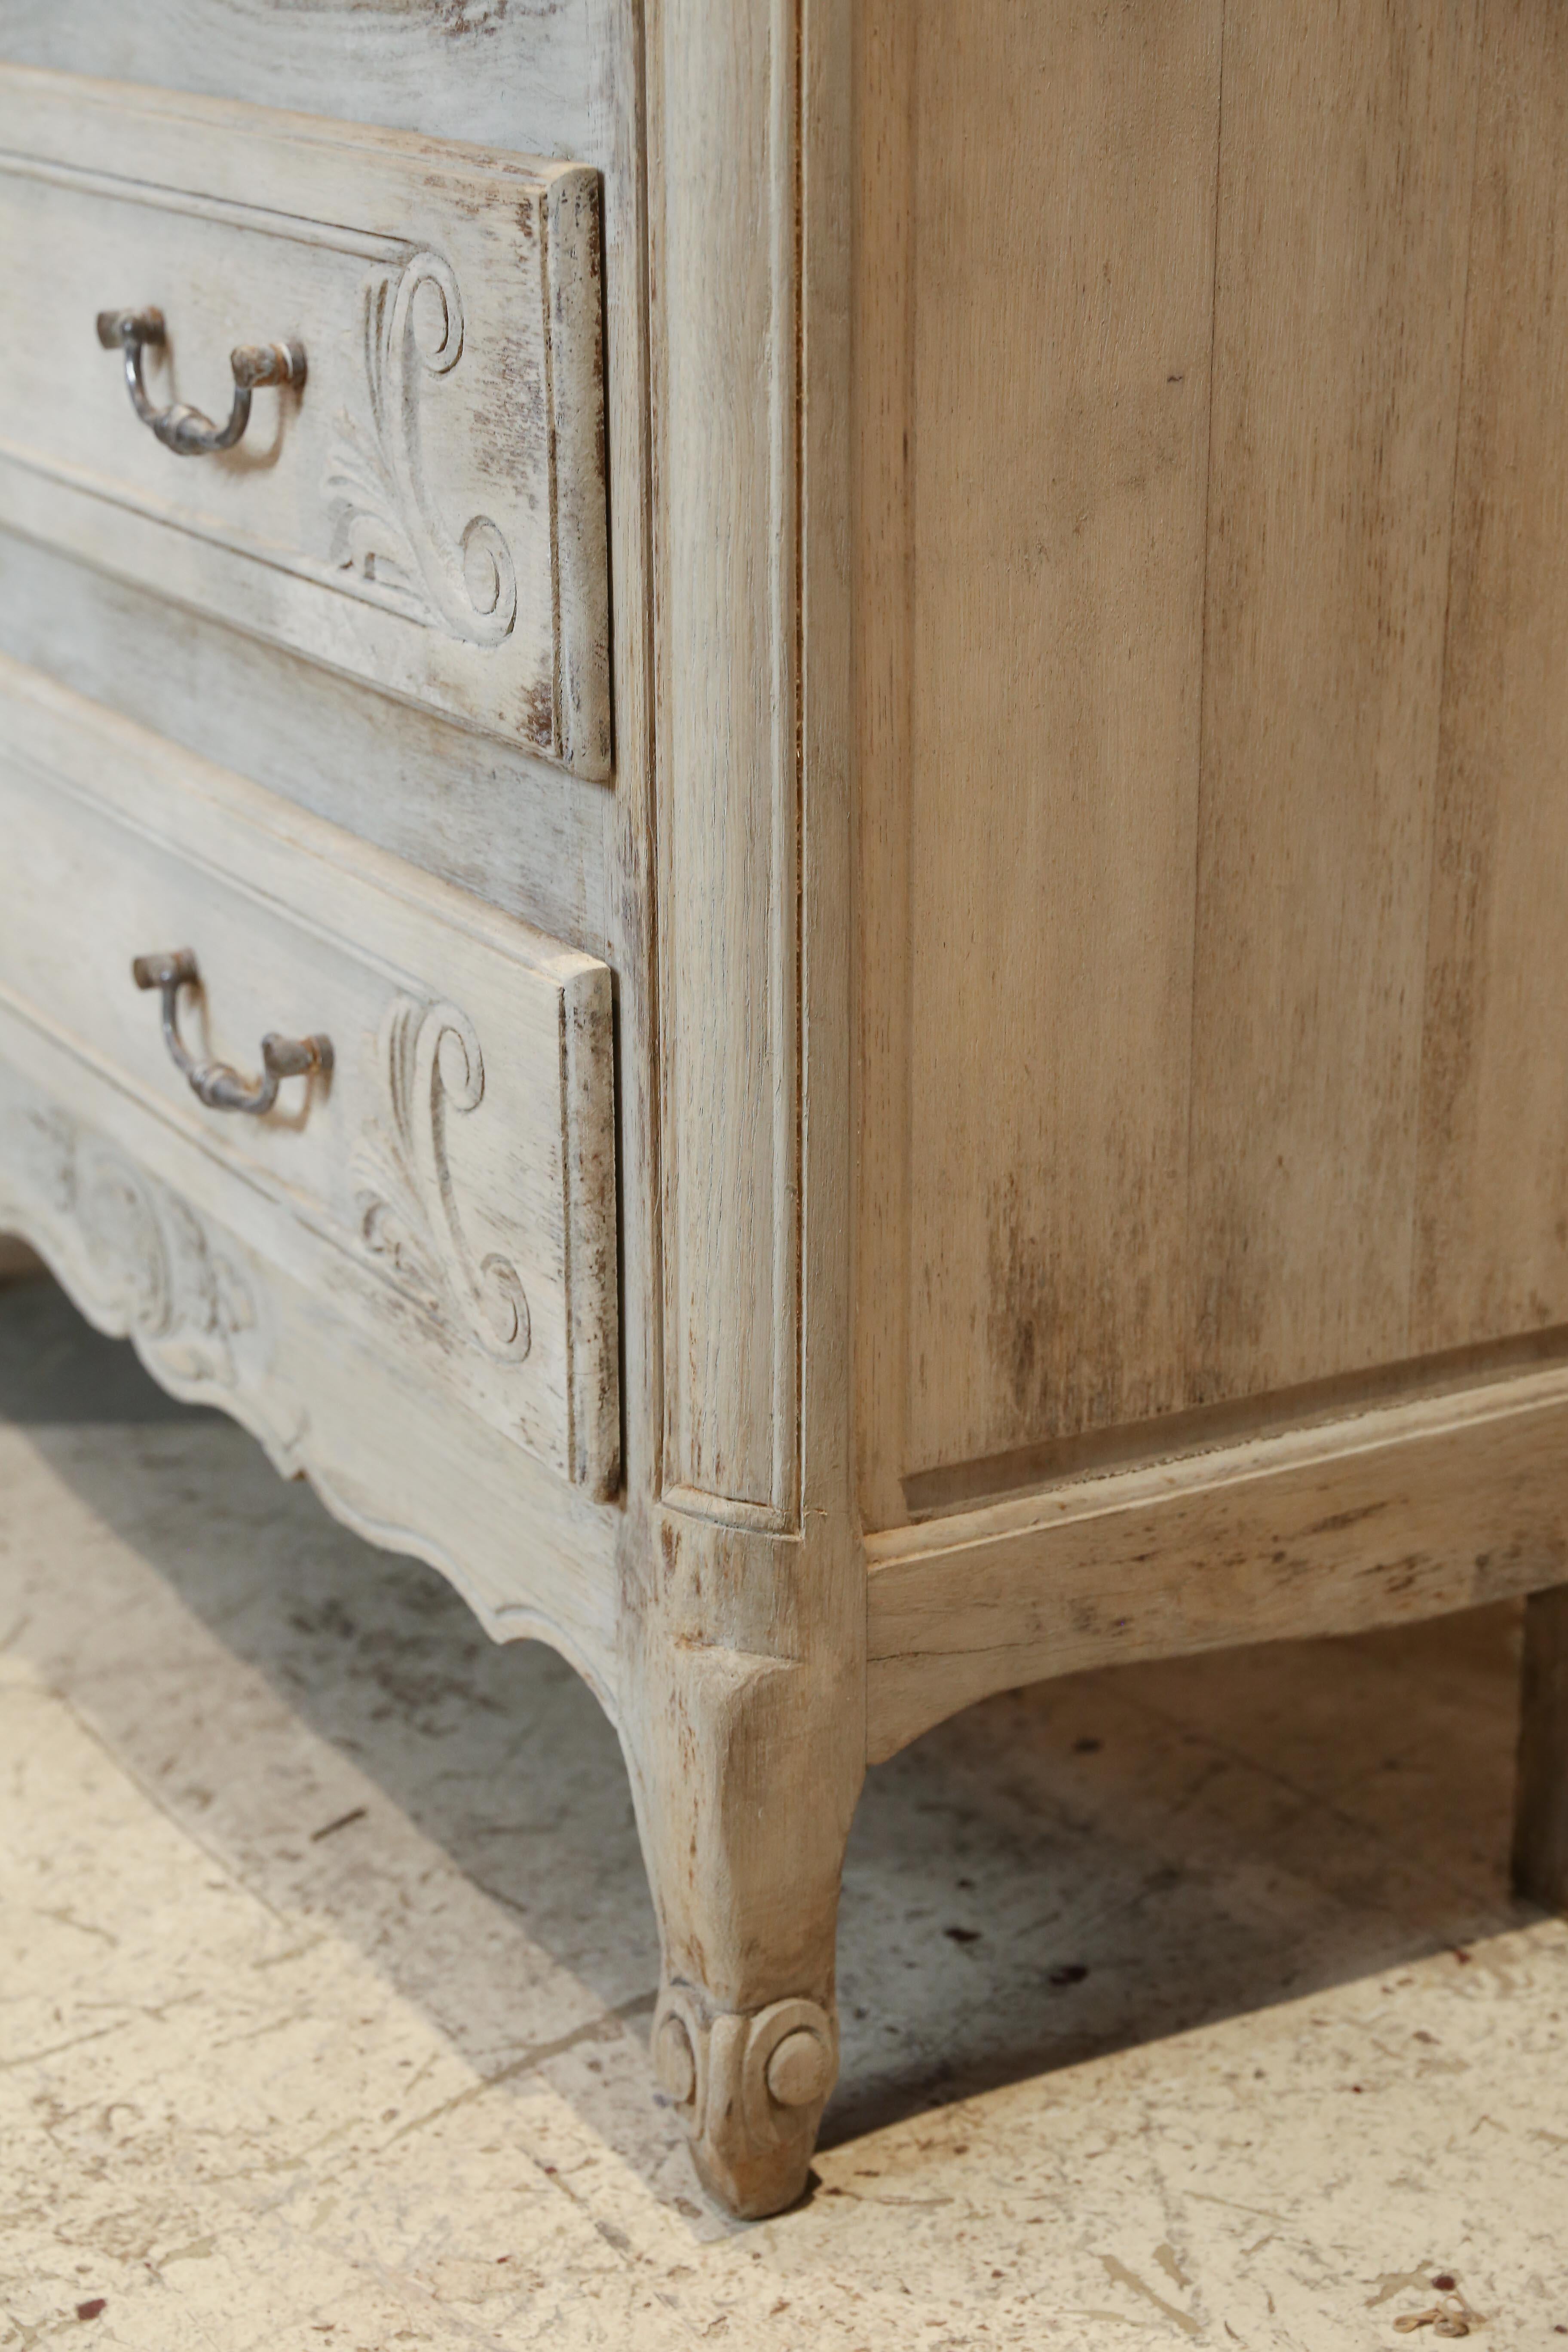 Early 20th Century Antique French Petite Bleached Three-Drawer Dresser with Carved Drawers